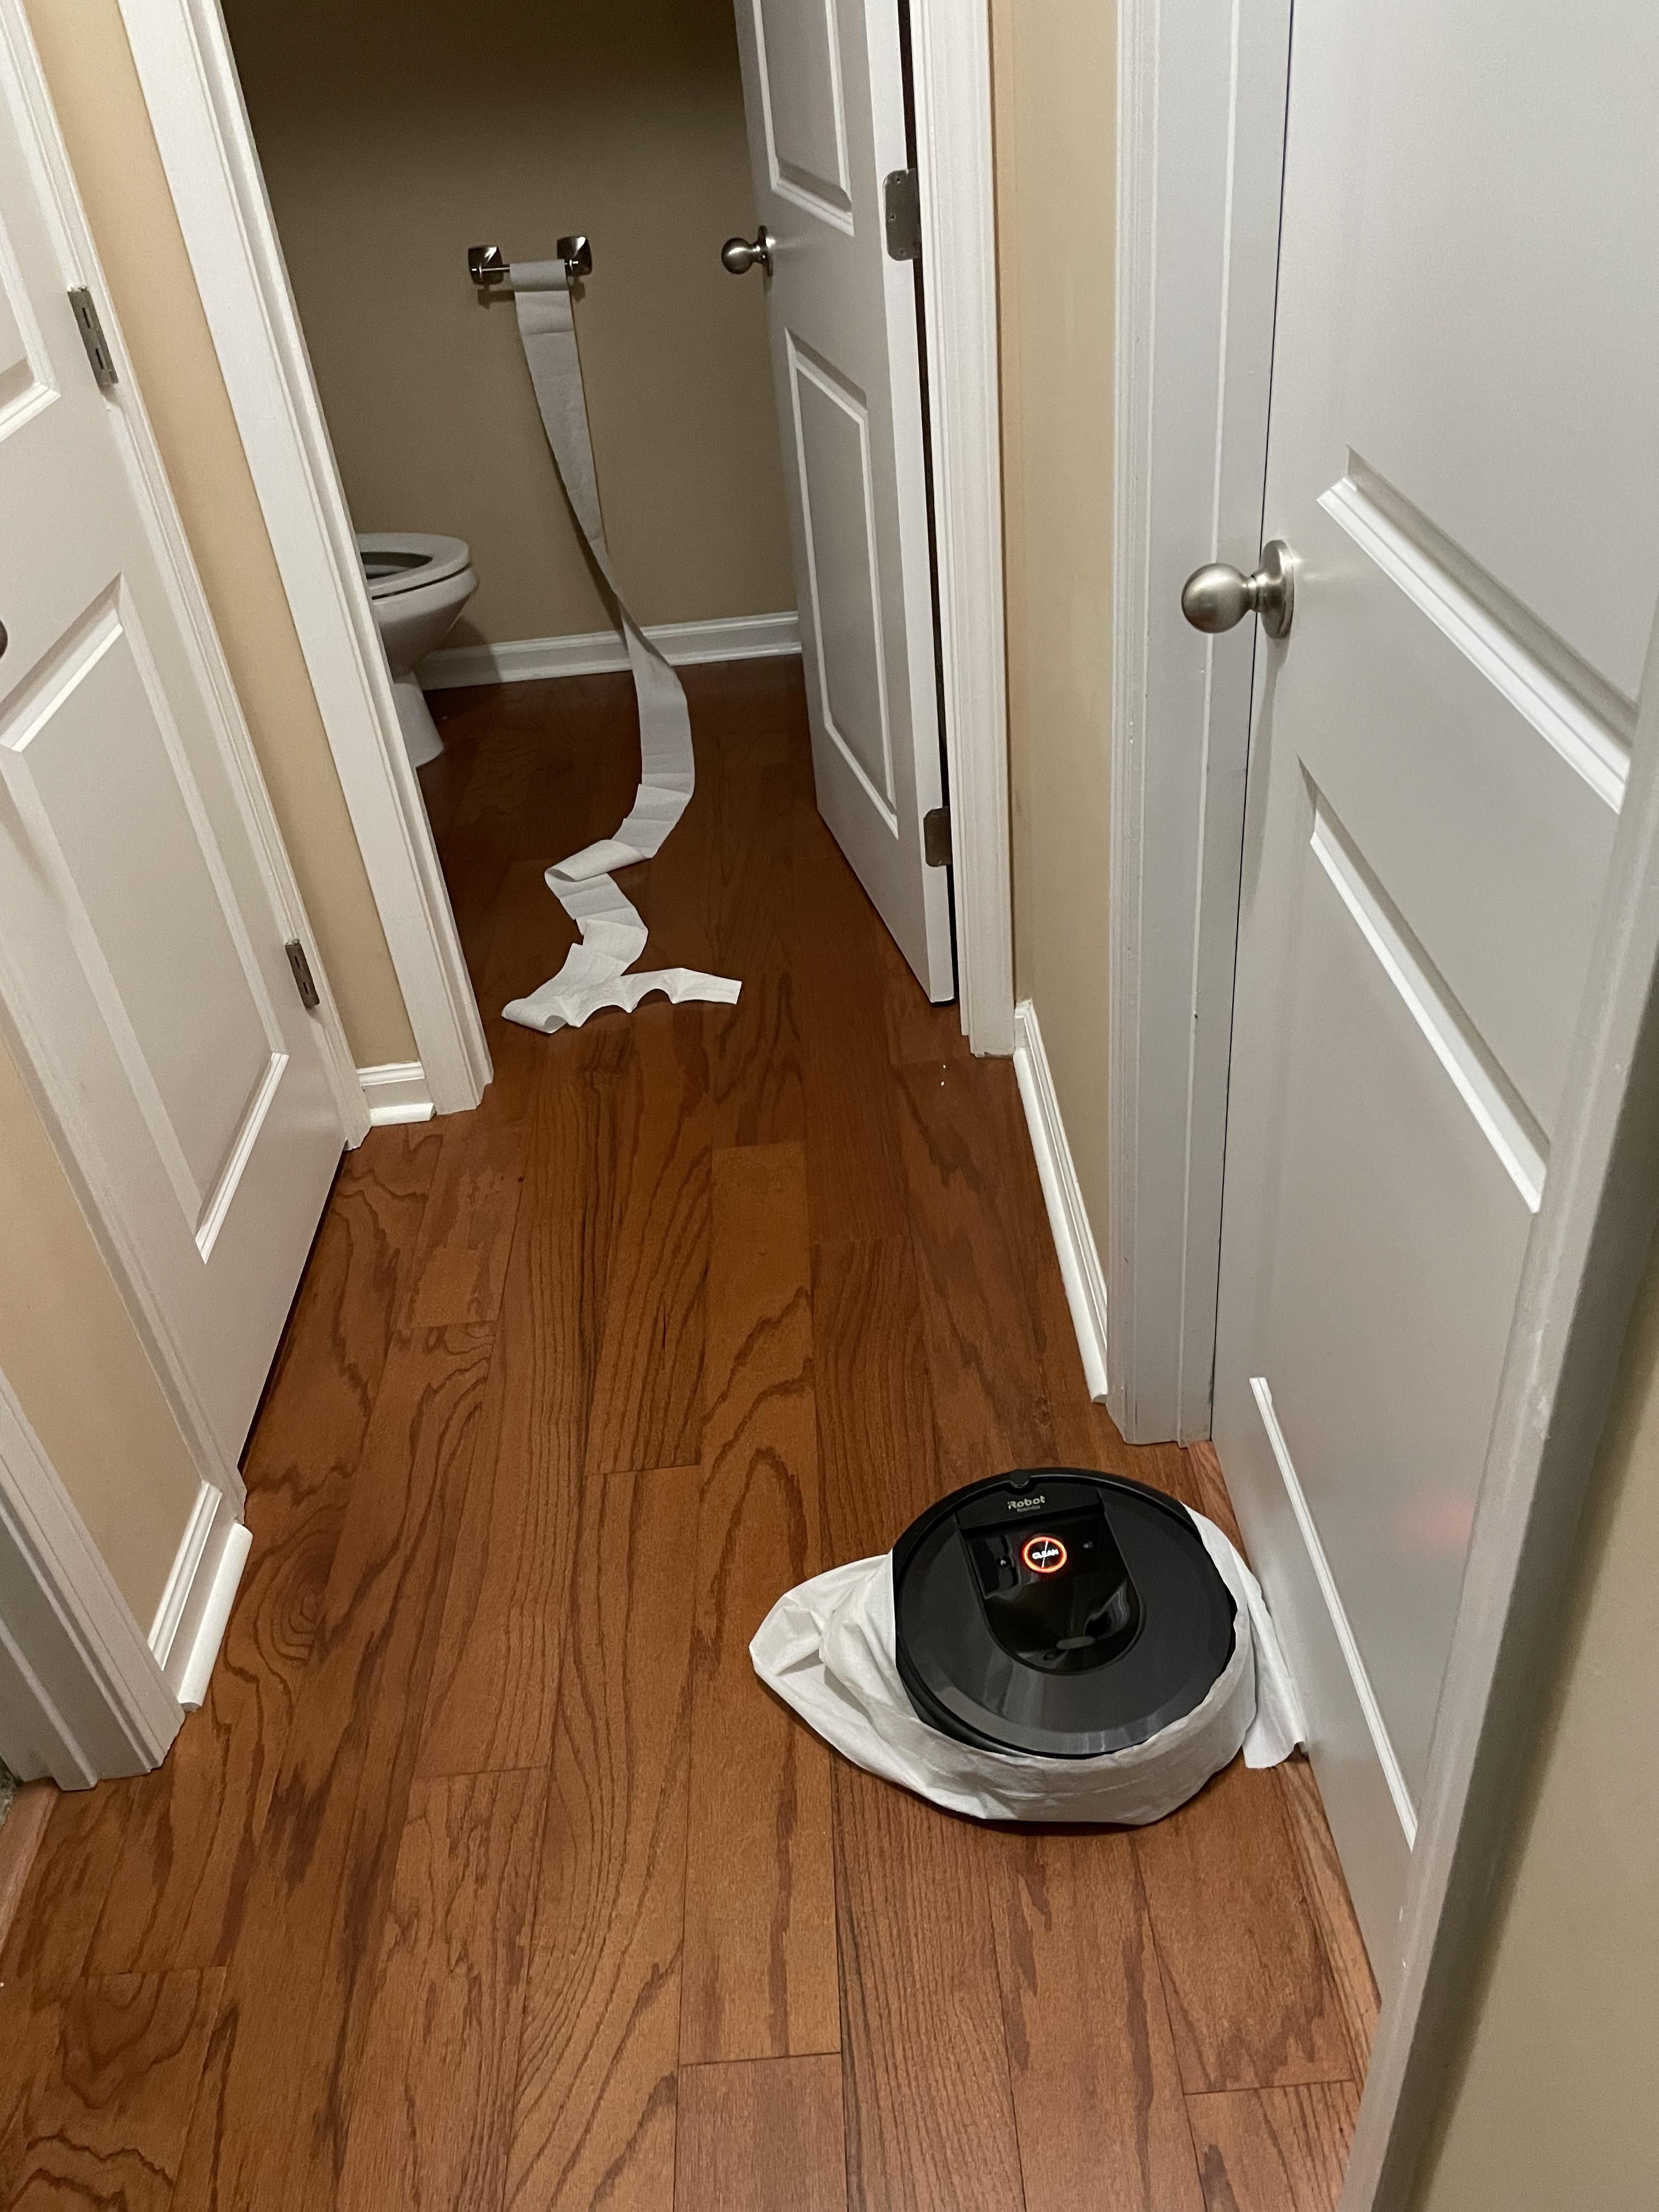 Got a notification to clear my Roomba’s brushes. This wasn’t what I expected.